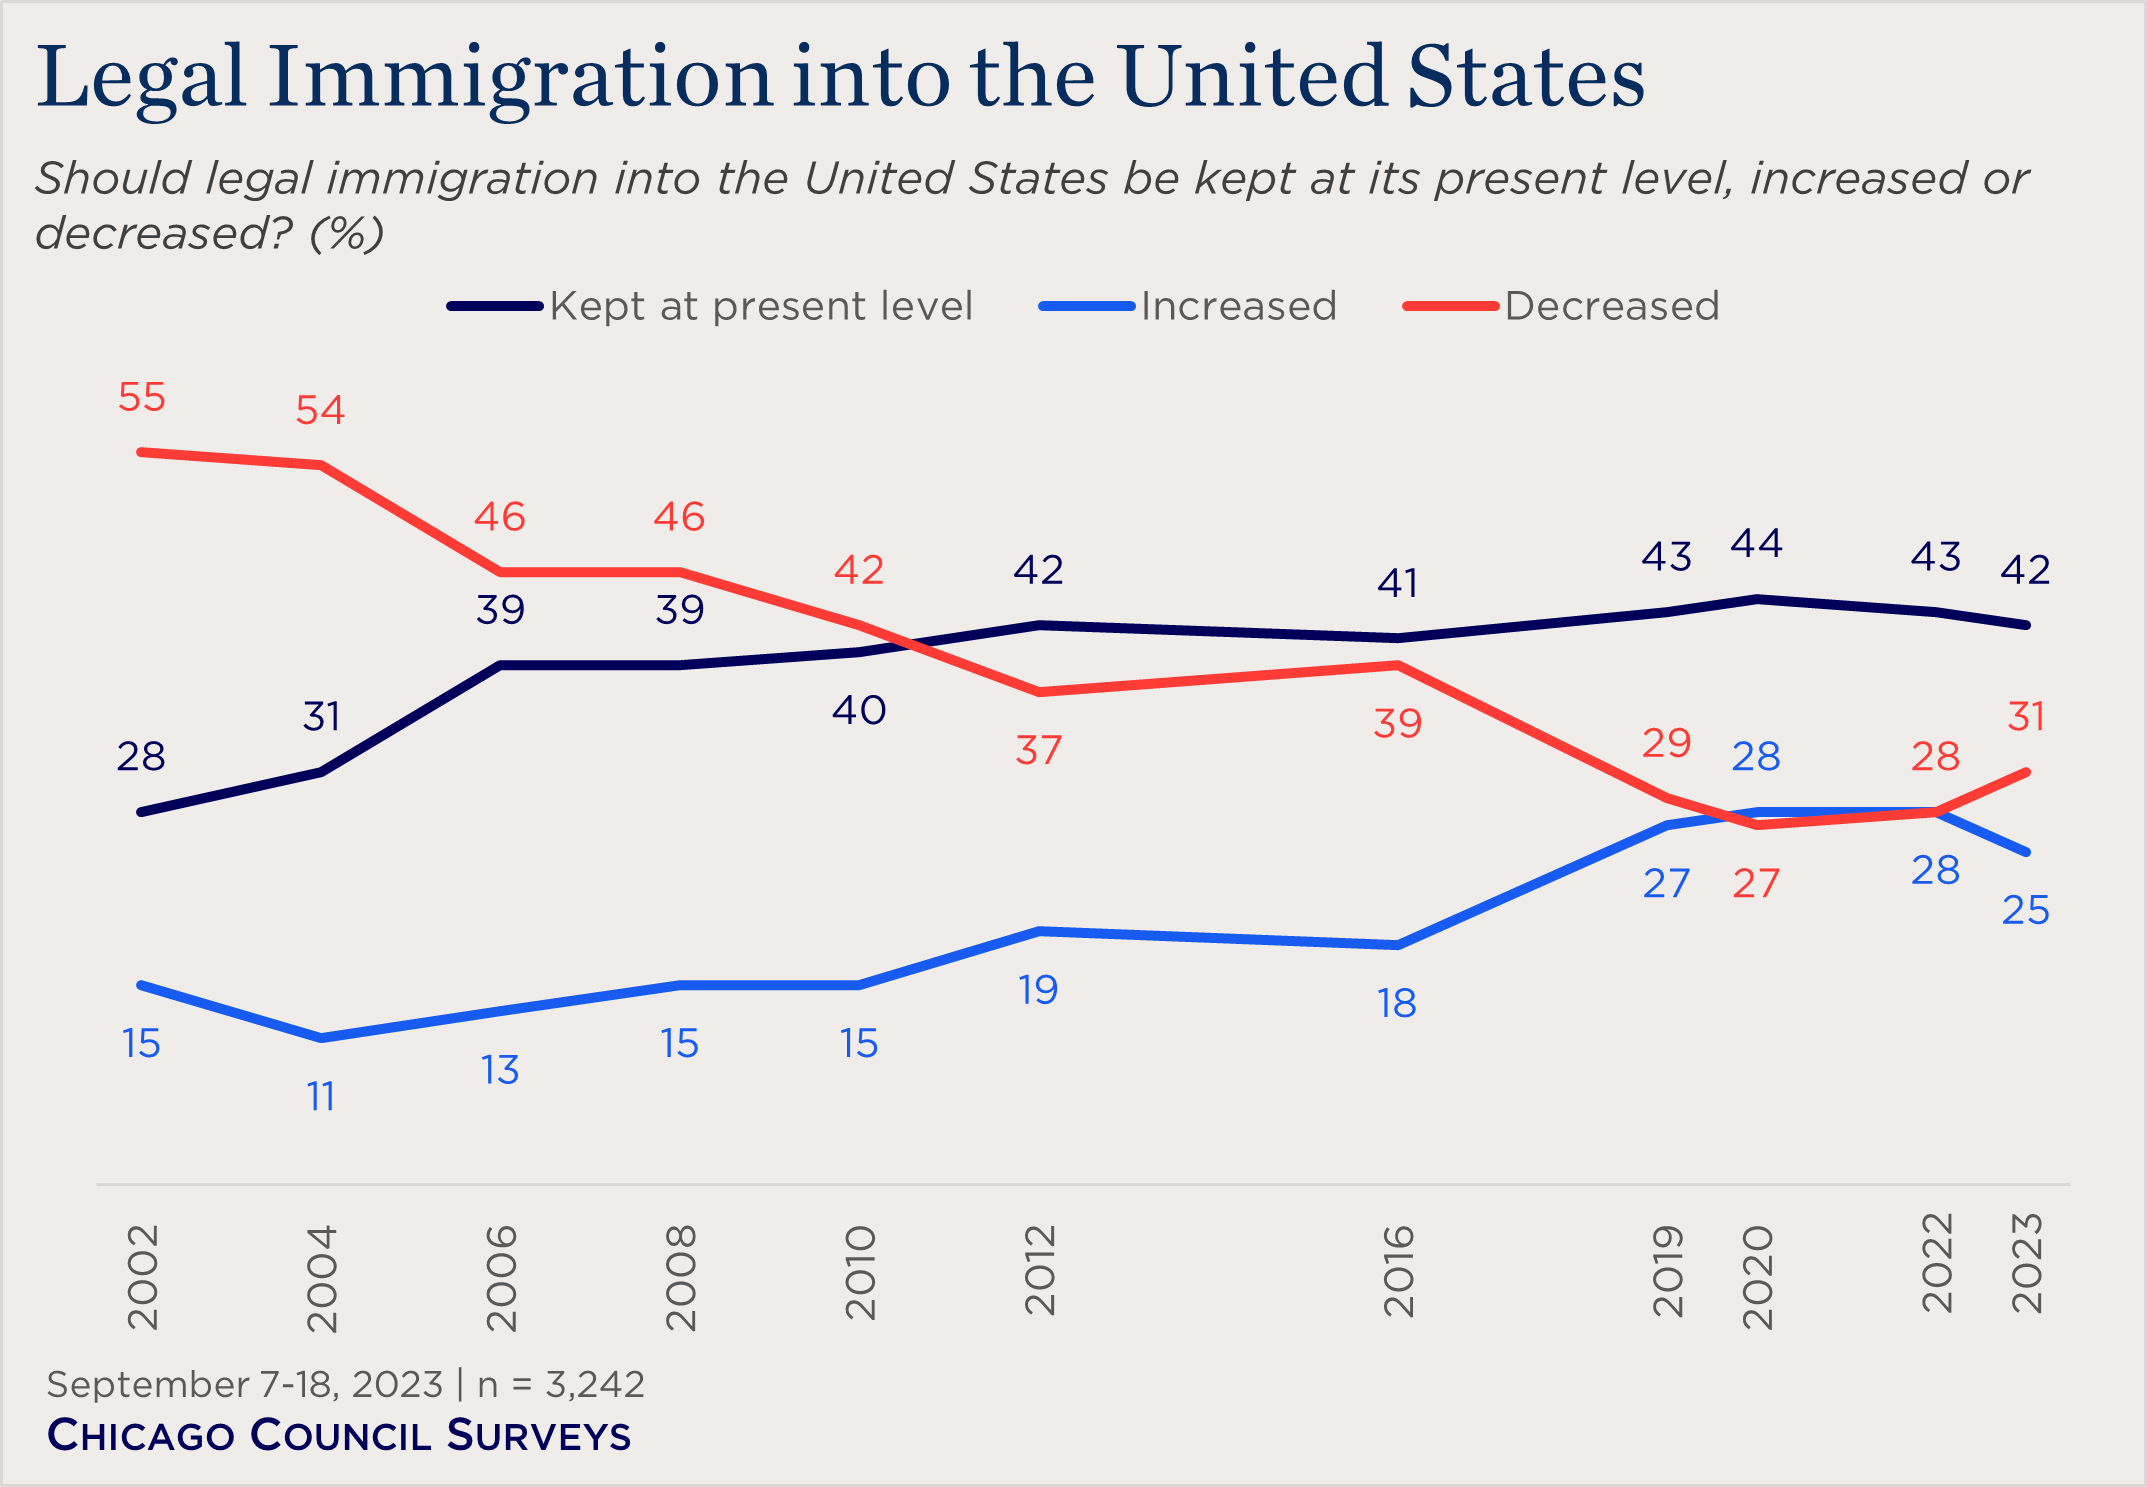 "line chart showing views on legal immigration levels"